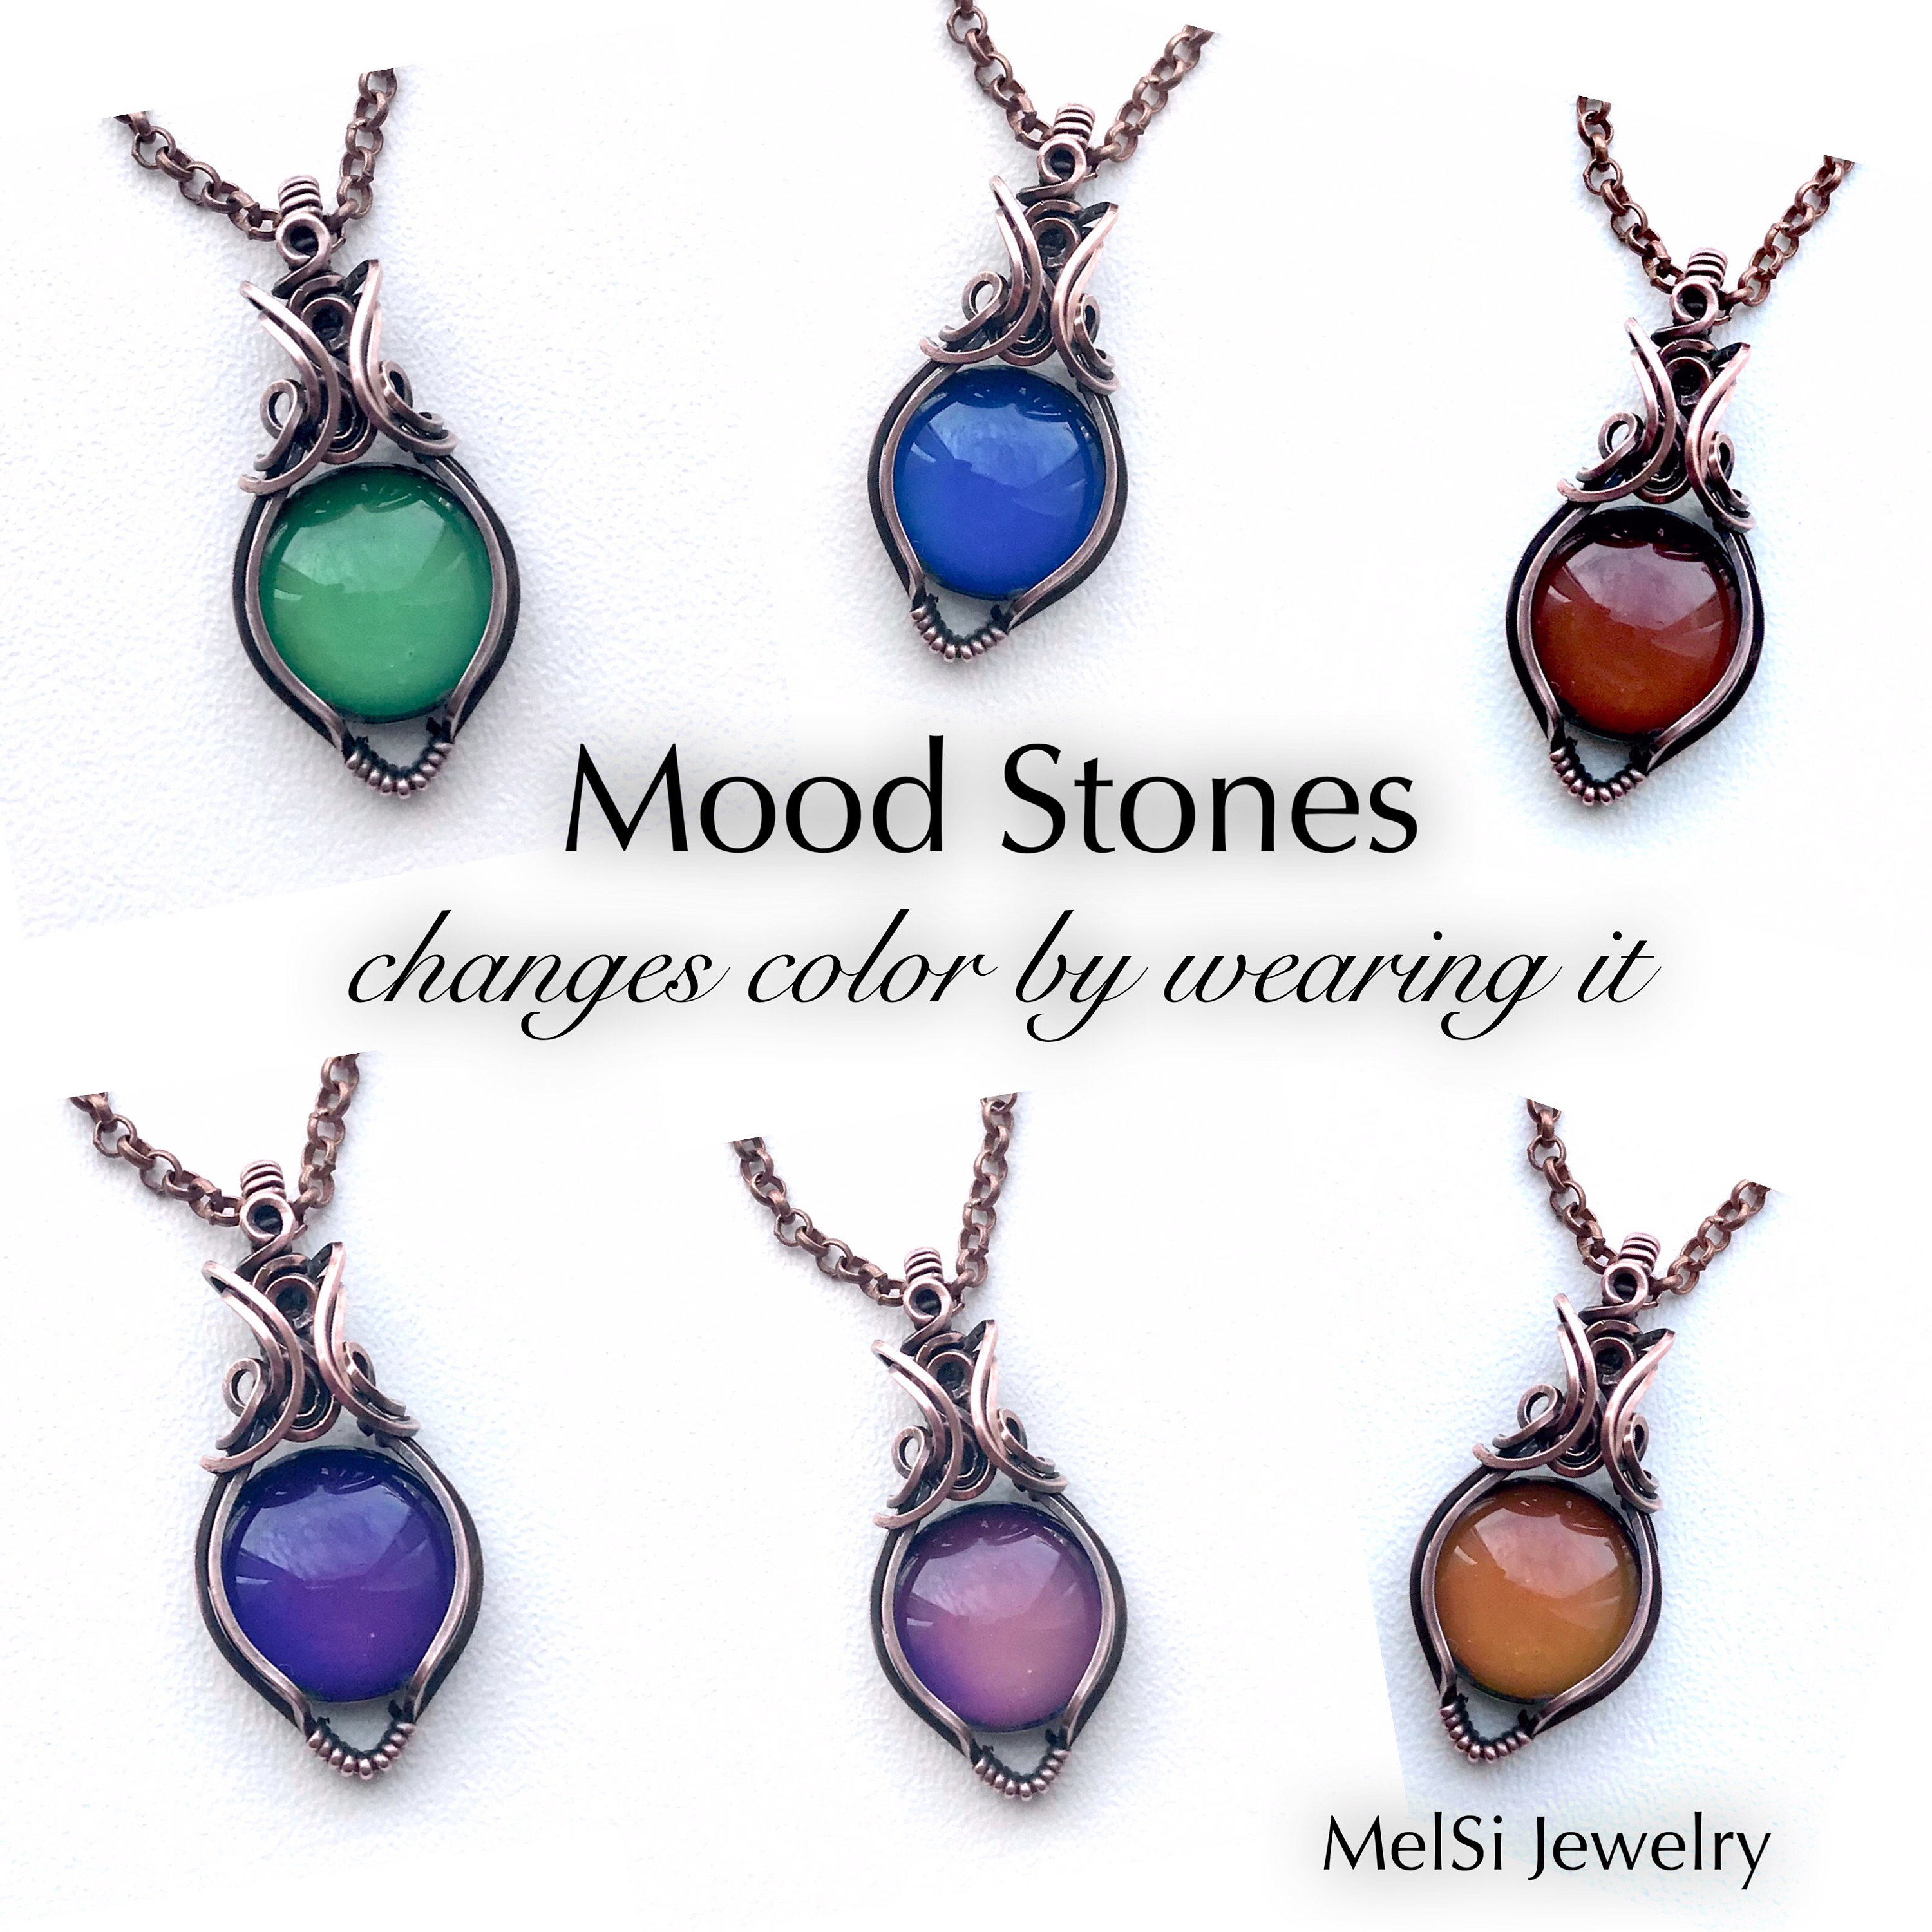 What do the colors mean on a mood necklace? - Quora